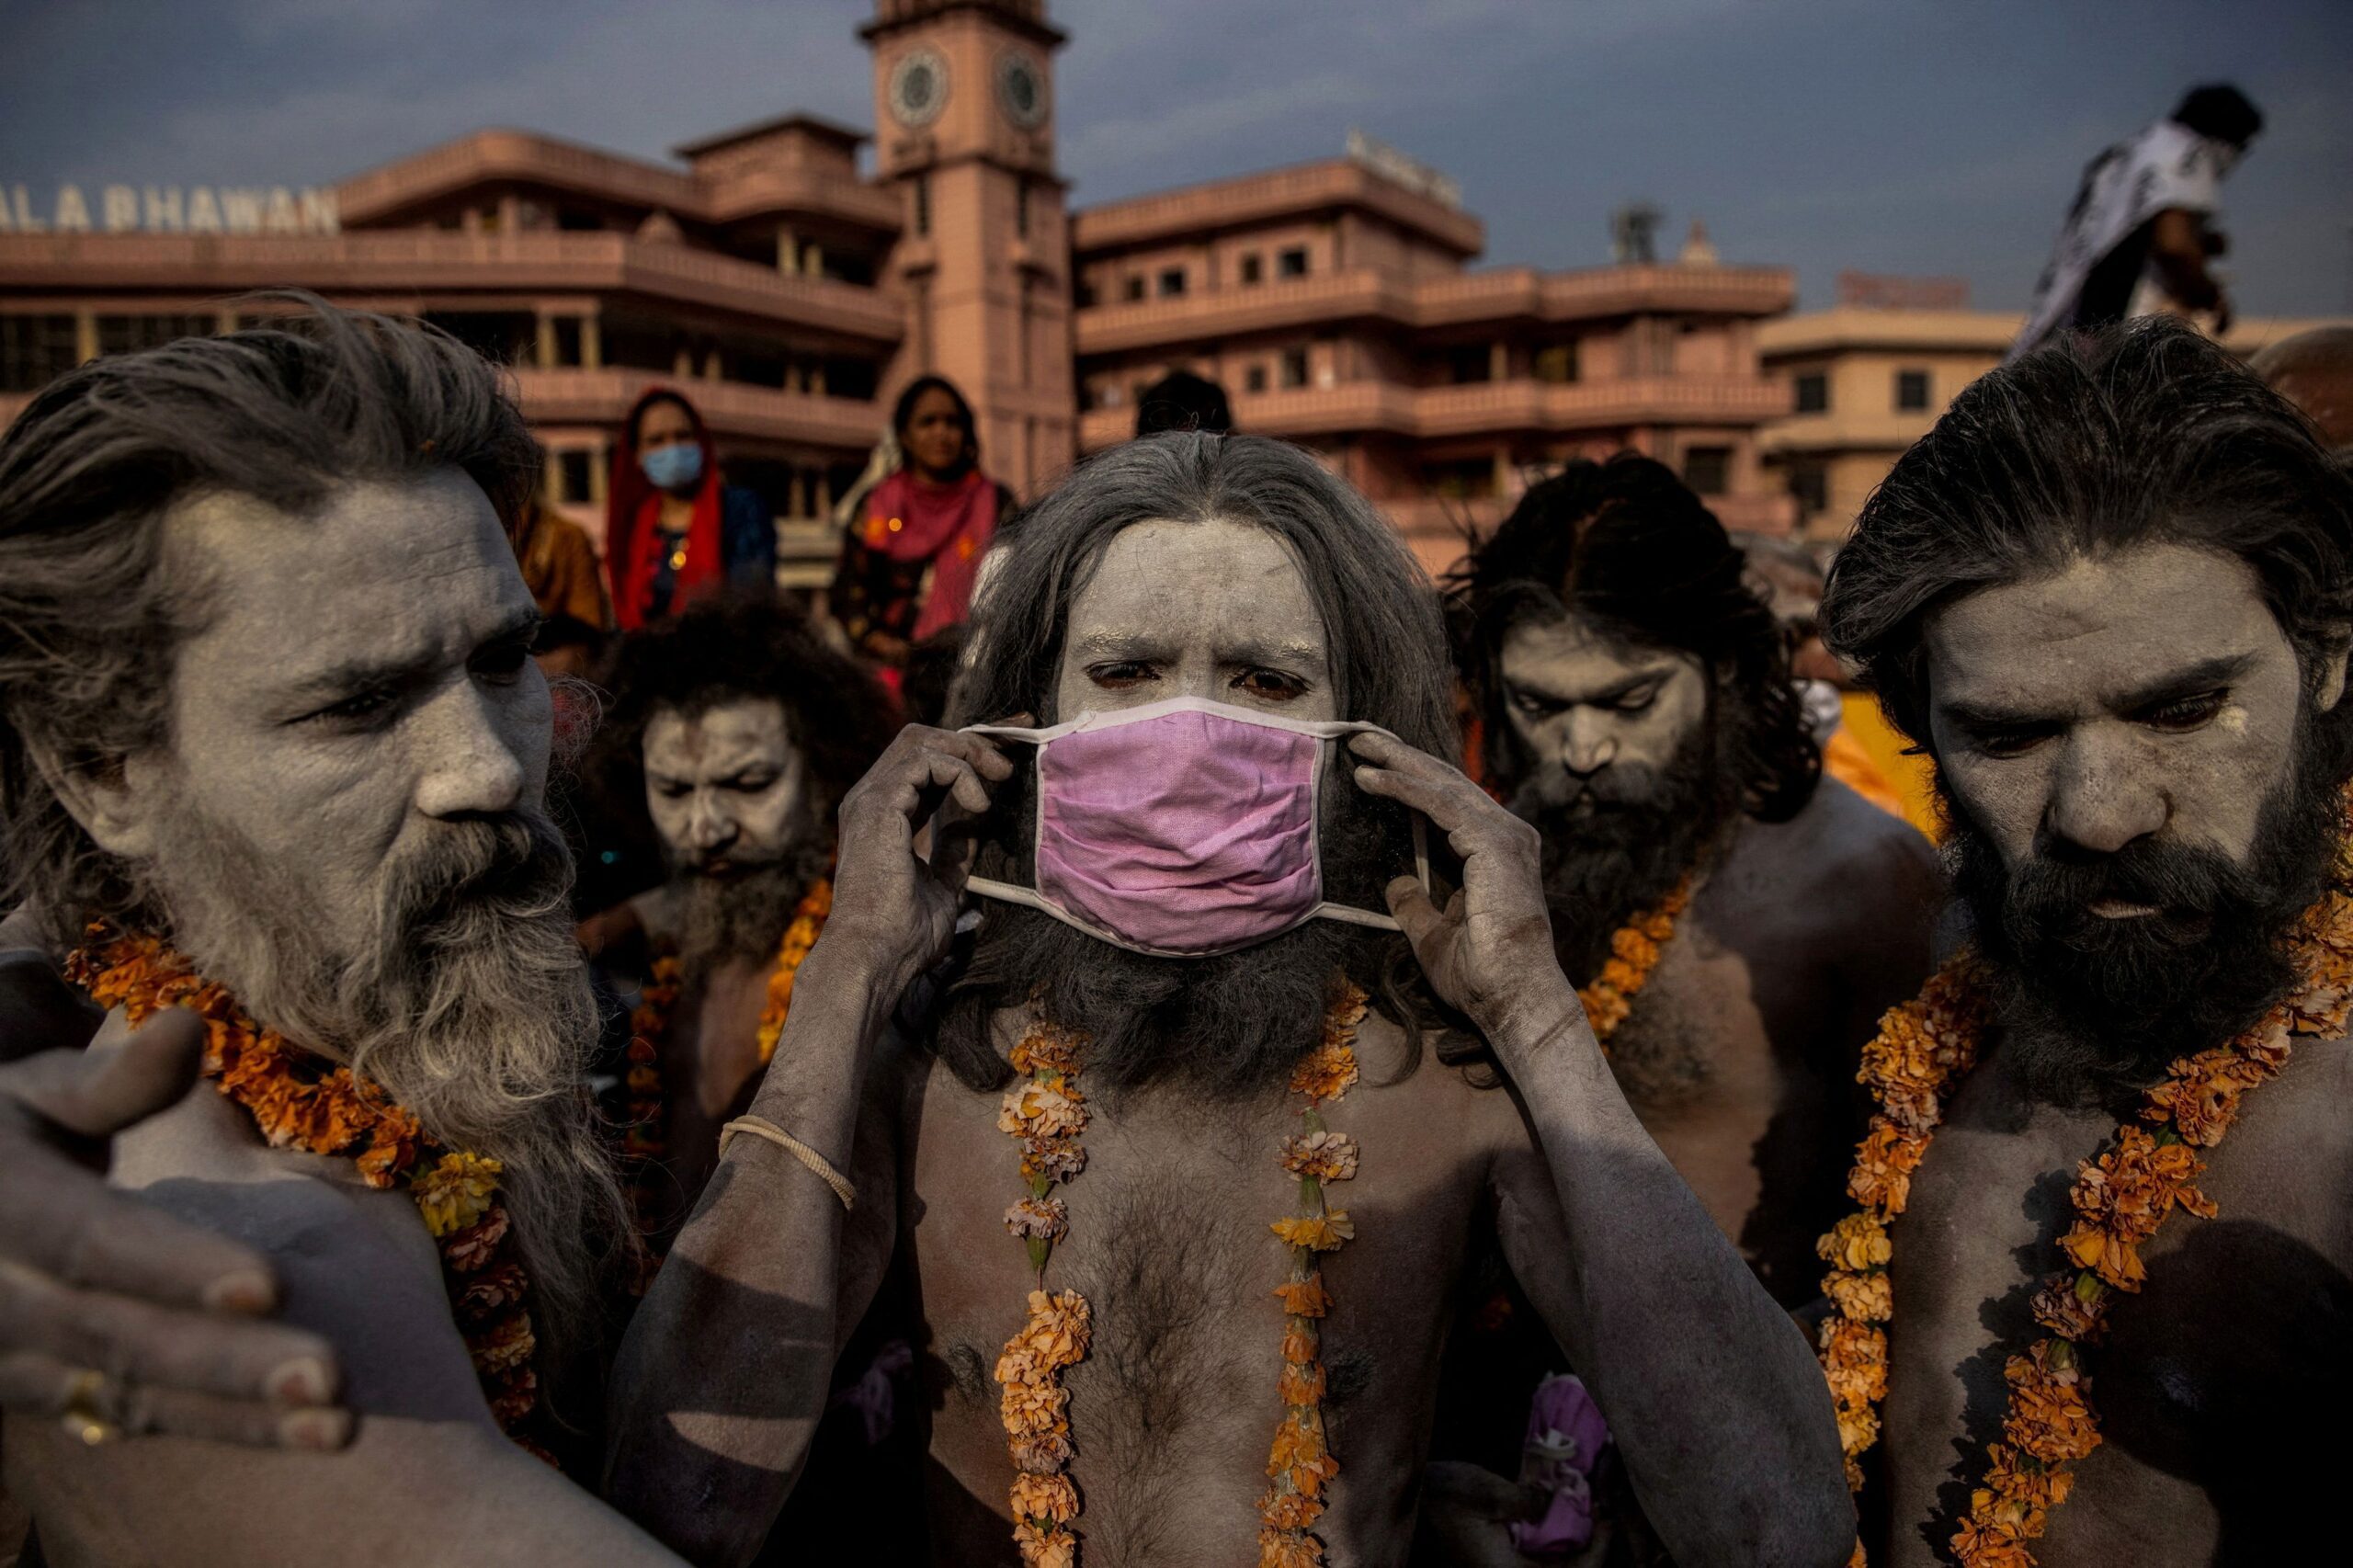 A 'Naga Sadhu,' or Hindu holy man, places a mask across his face before entering the Ganges river during the traditional Shahi Snan, or royal dip, at the Kumbh Mela festival in Haridwar, India, April 12, 2021. As coronavirus disease (COVID-19) cases and deaths exploded in India in April and May, hospitals ran so short of oxygen that many patients suffocated. REUTERS/Danish Siddiqui